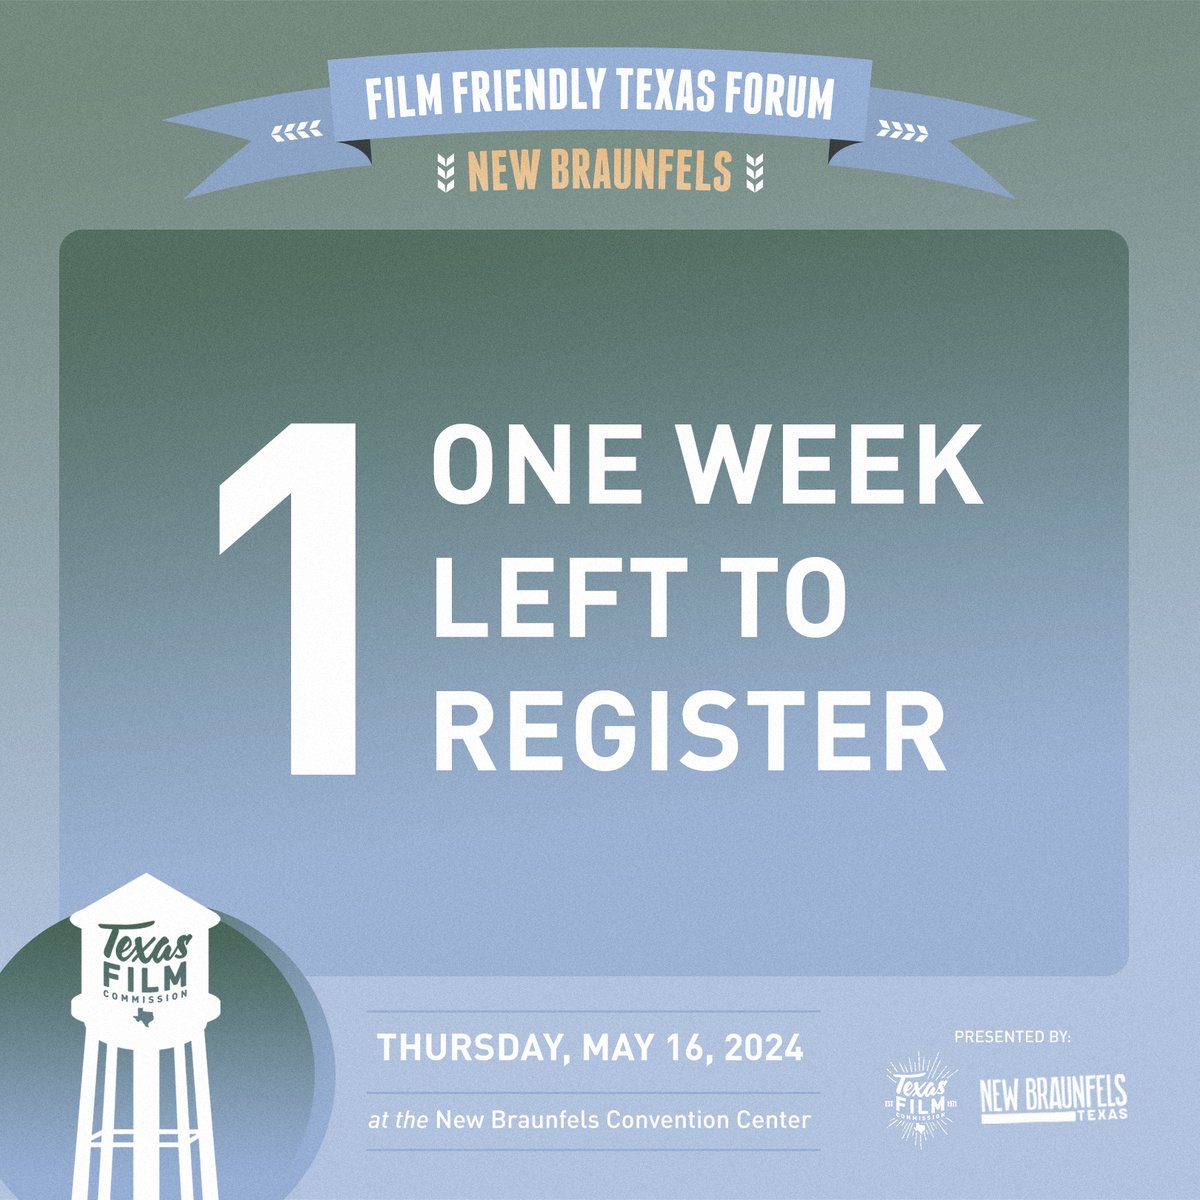 Don't miss out on the The Film Friendly Texas Forum with our sister office, the @TexasFilmComm, on Thursday, May 16 in our @MusicFriendlyTX Community of @CityofNBTX! Learn How to Become a Film and Digital Media Texas Certified Community! Register now! eventbrite.com/e/the-film-fri…